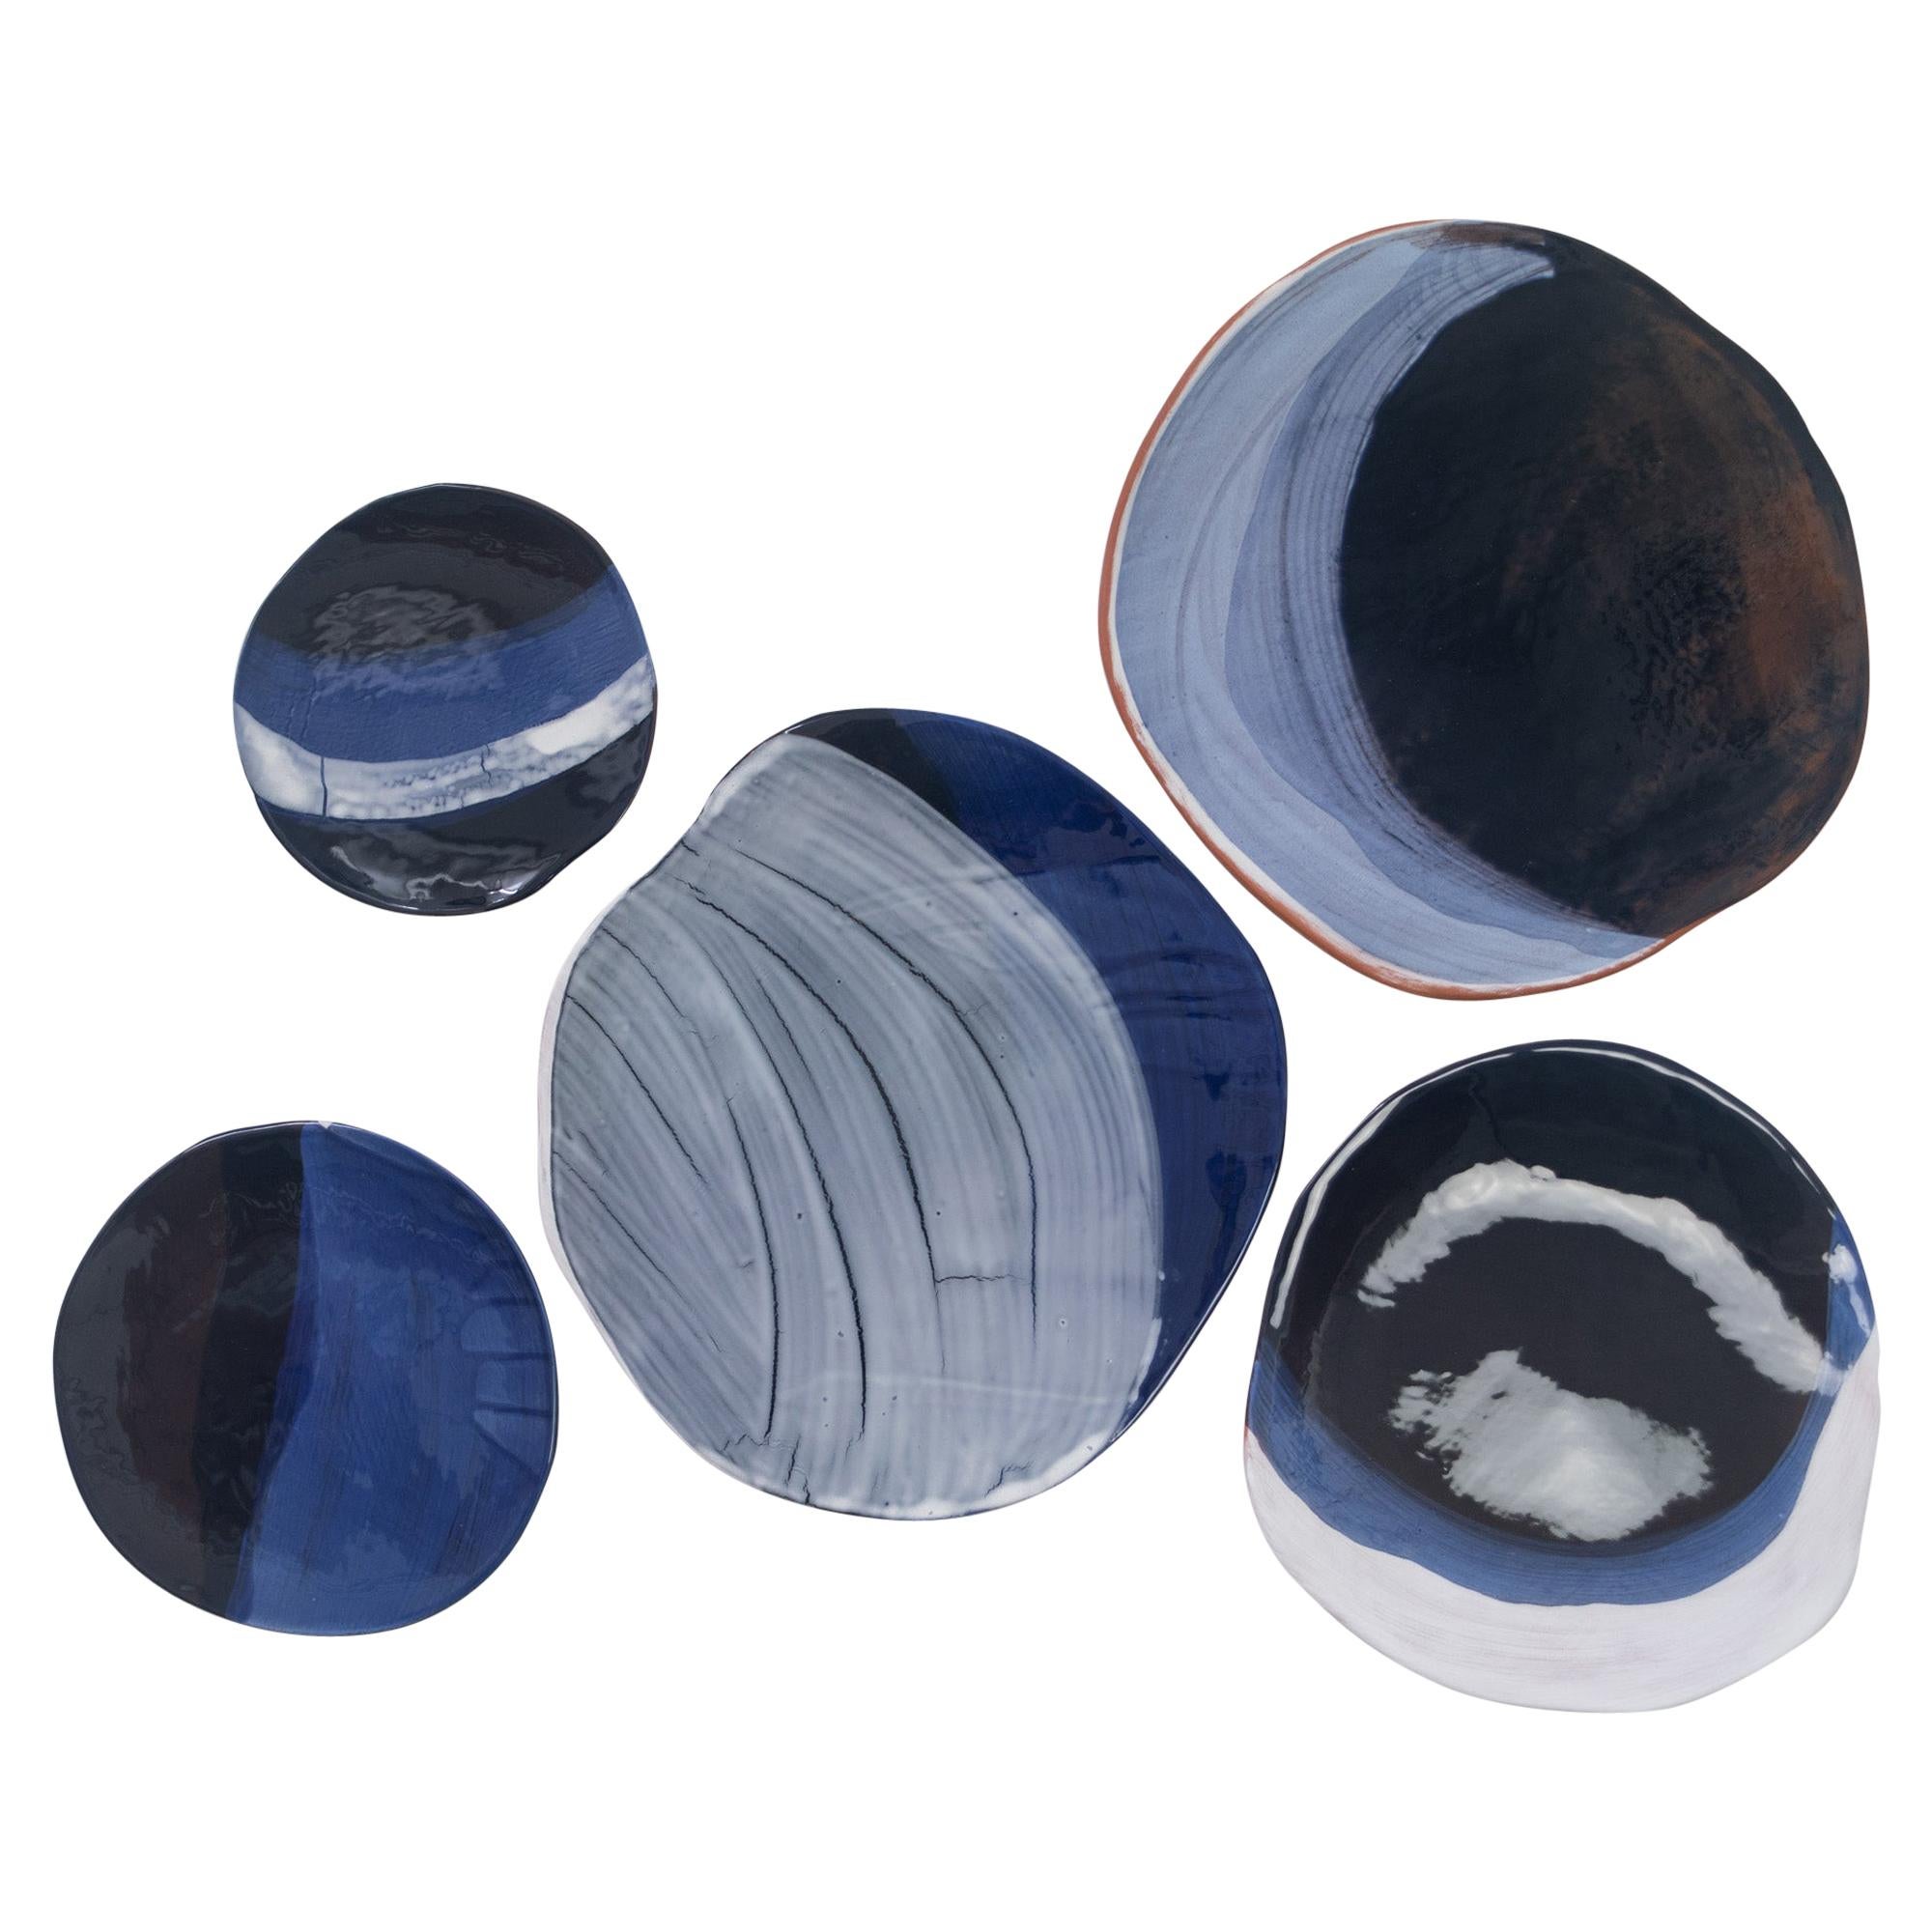 Unique wall art: a series of 5 ceramics evoking the phases of the moon
The pieces can also be arranged on a large table.

Diameters are: 8.5